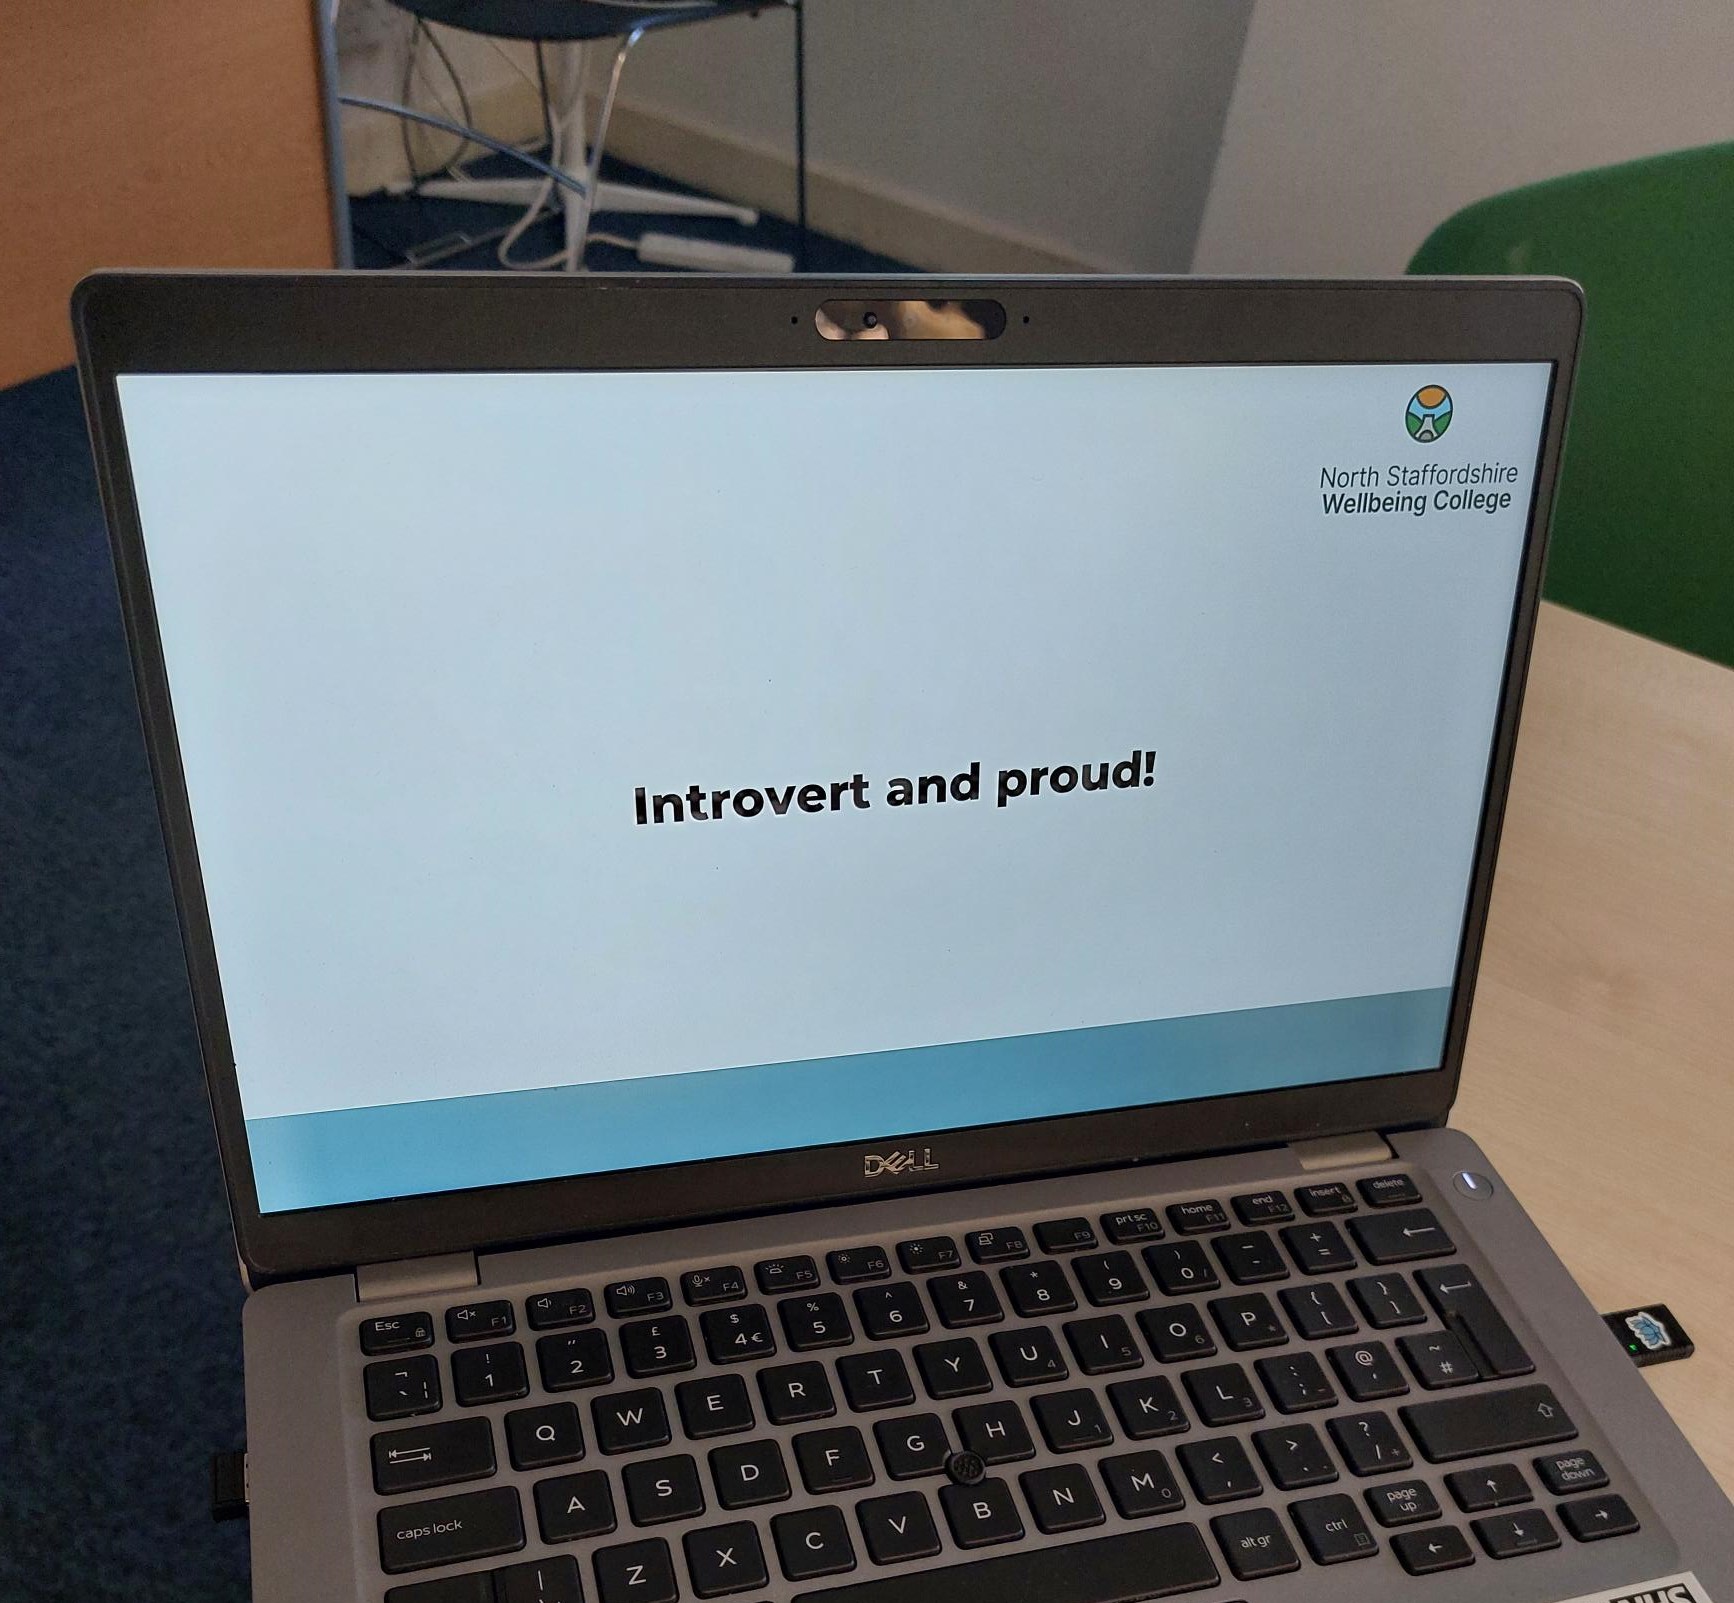 Laptop on table with screen saying 'Introvert and proud'